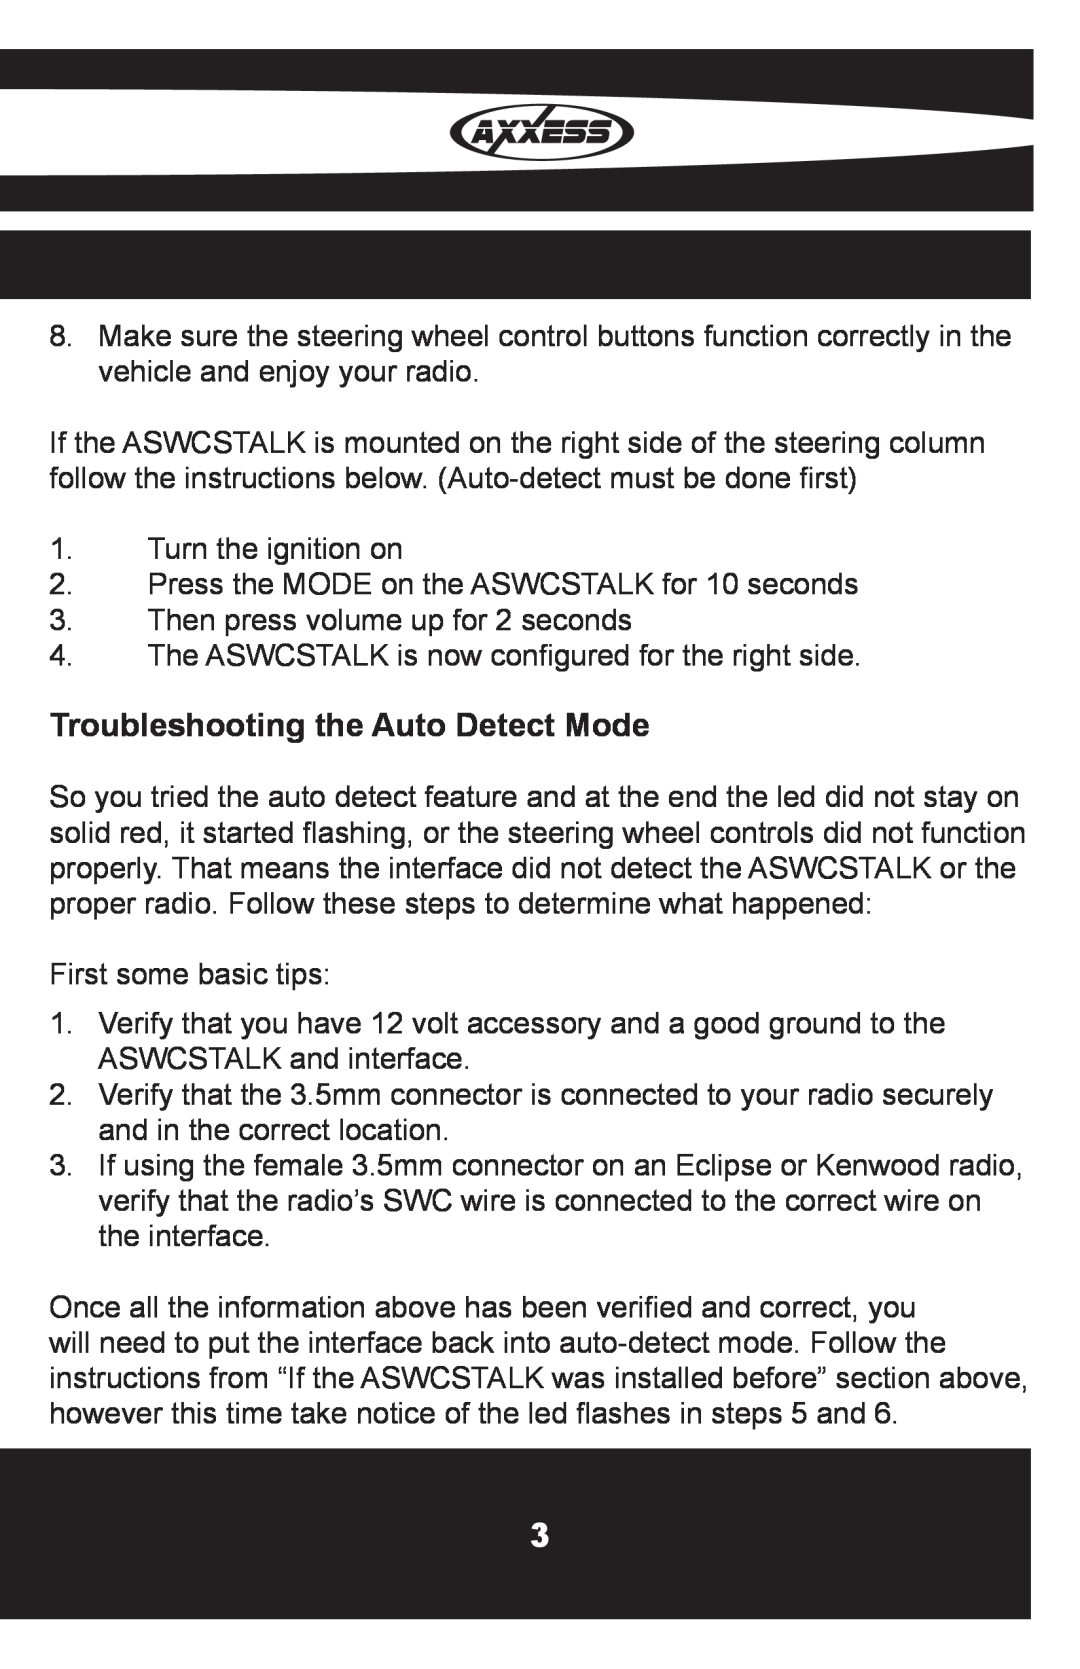 Metra Electronics OESWC-6502-STK installation instructions Troubleshooting the Auto Detect Mode 